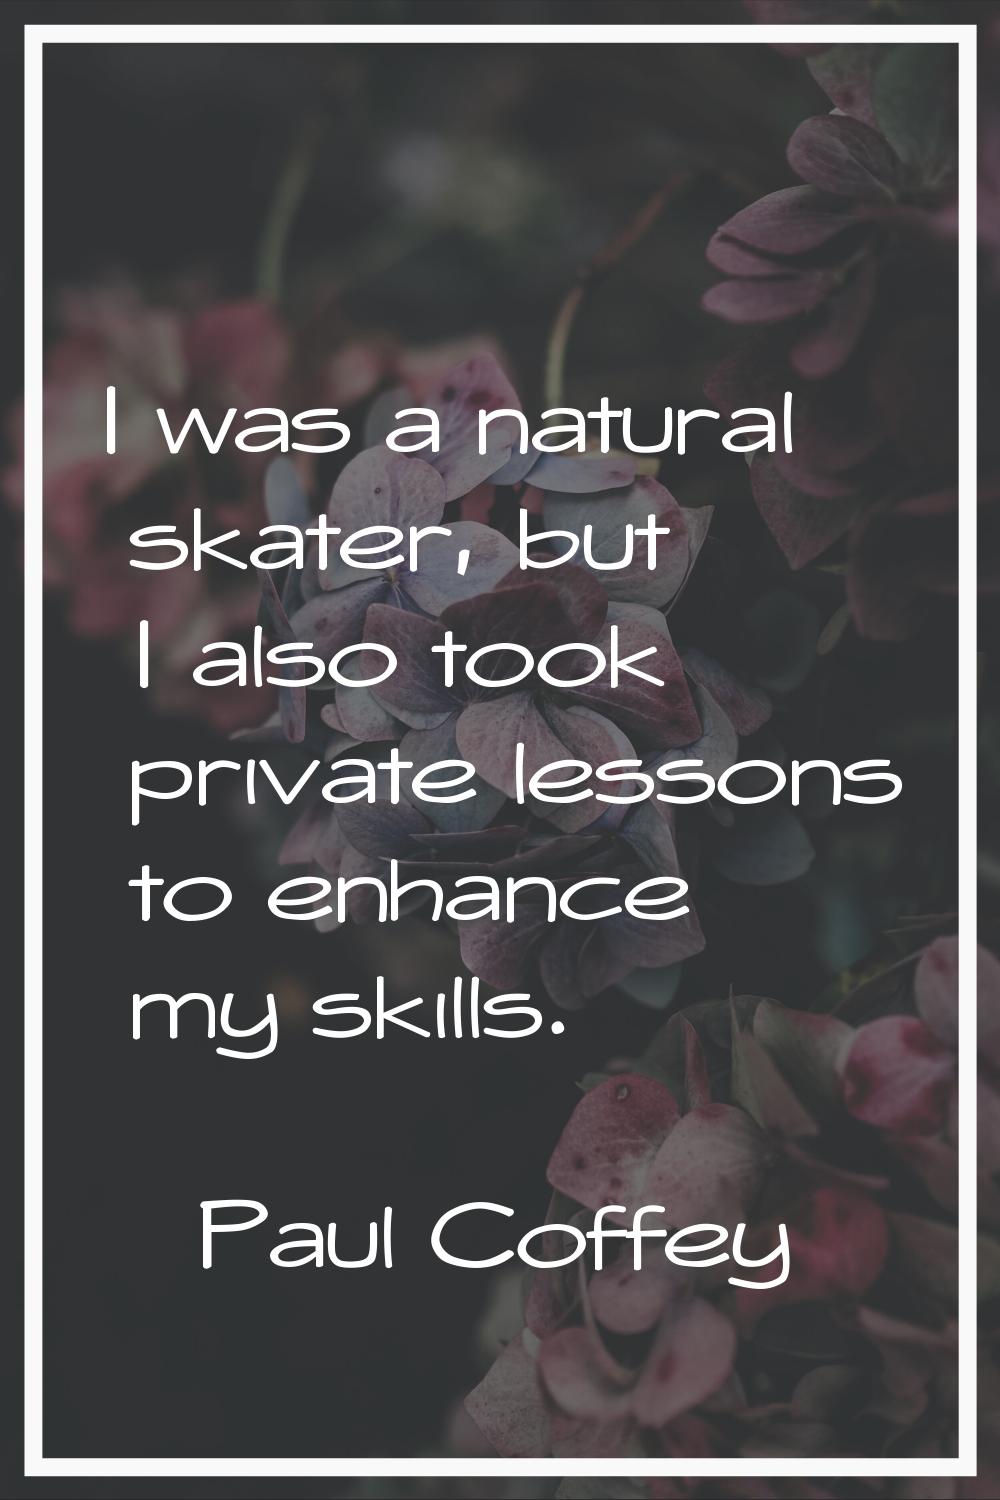 I was a natural skater, but I also took private lessons to enhance my skills.